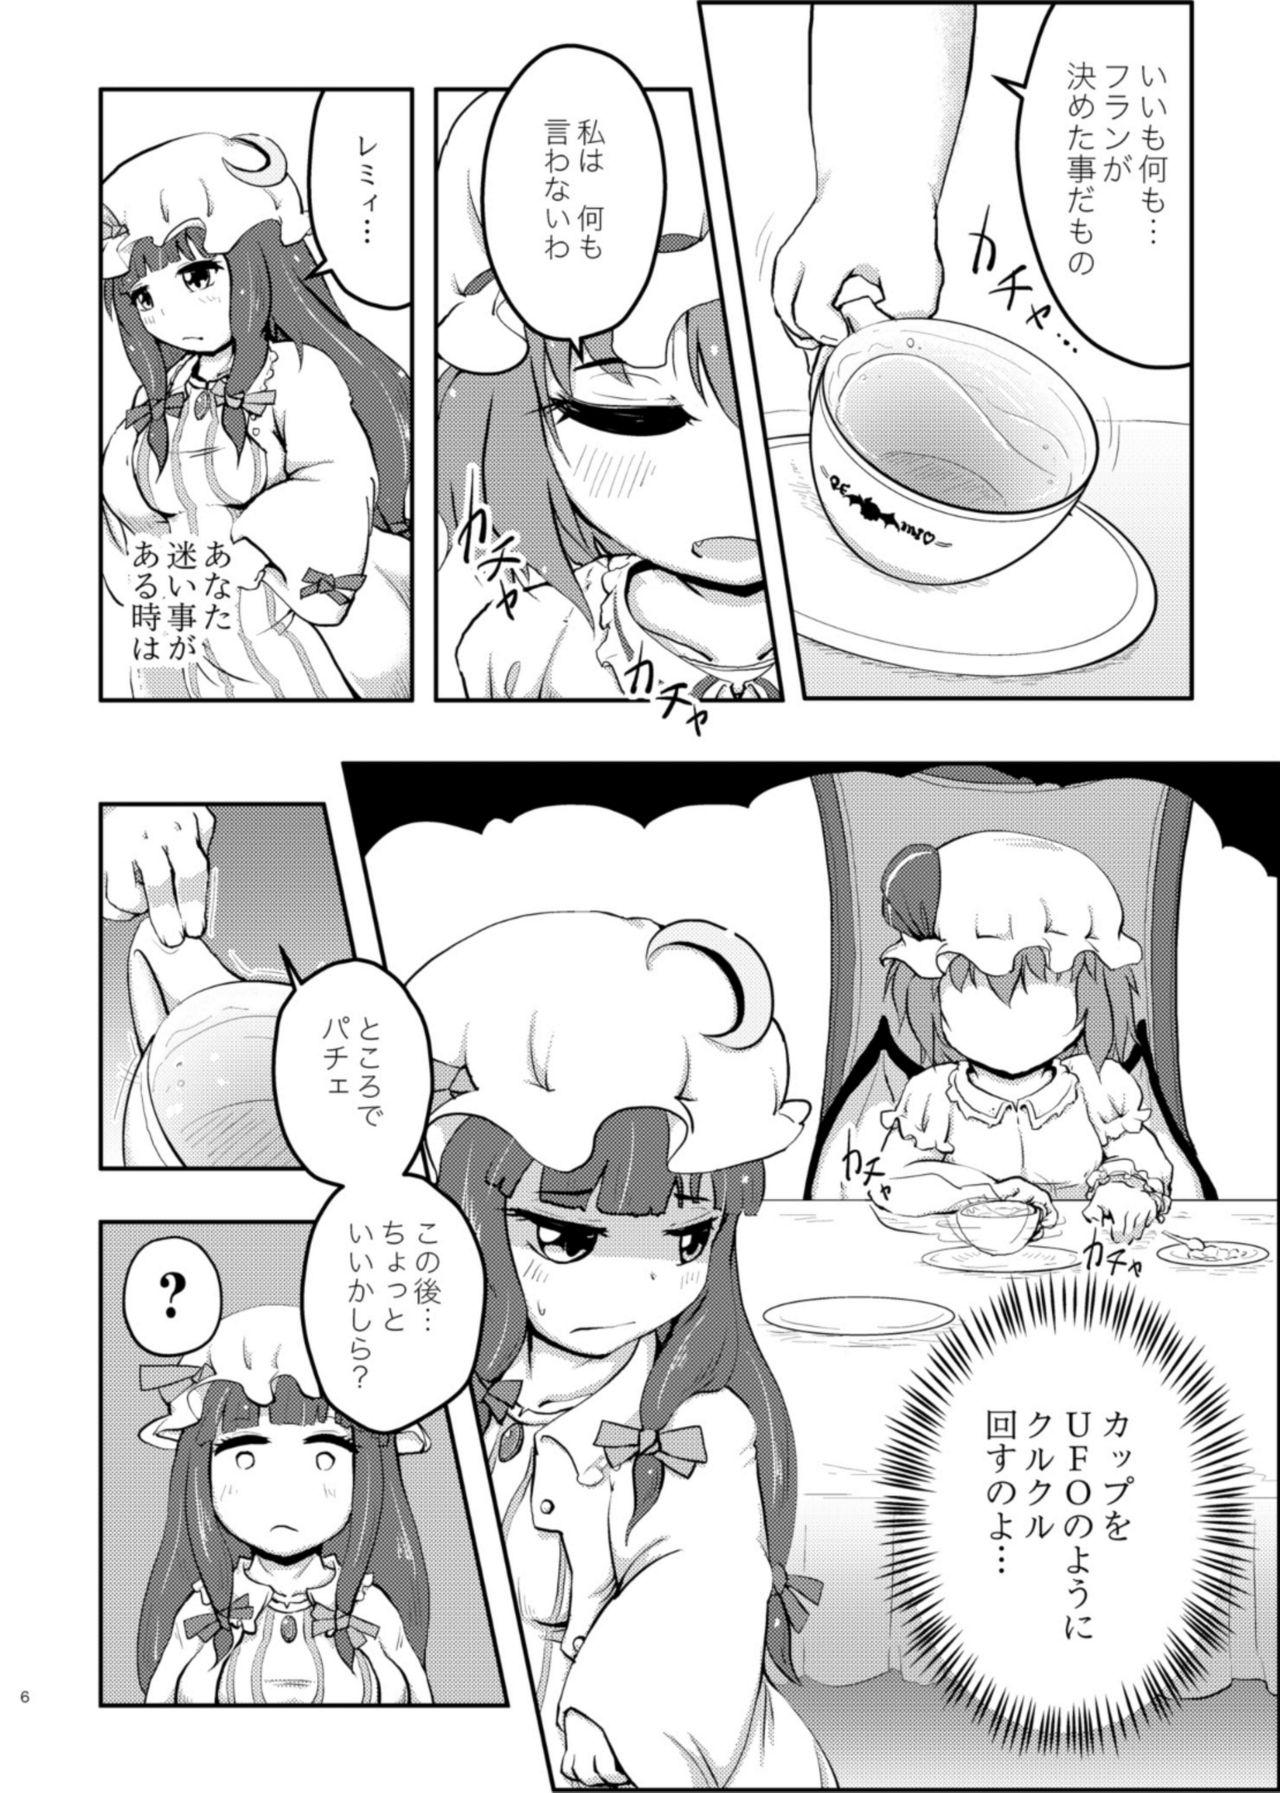 Viet Nam Scarlet Conflict 2 - Touhou project Reverse Cowgirl - Page 6